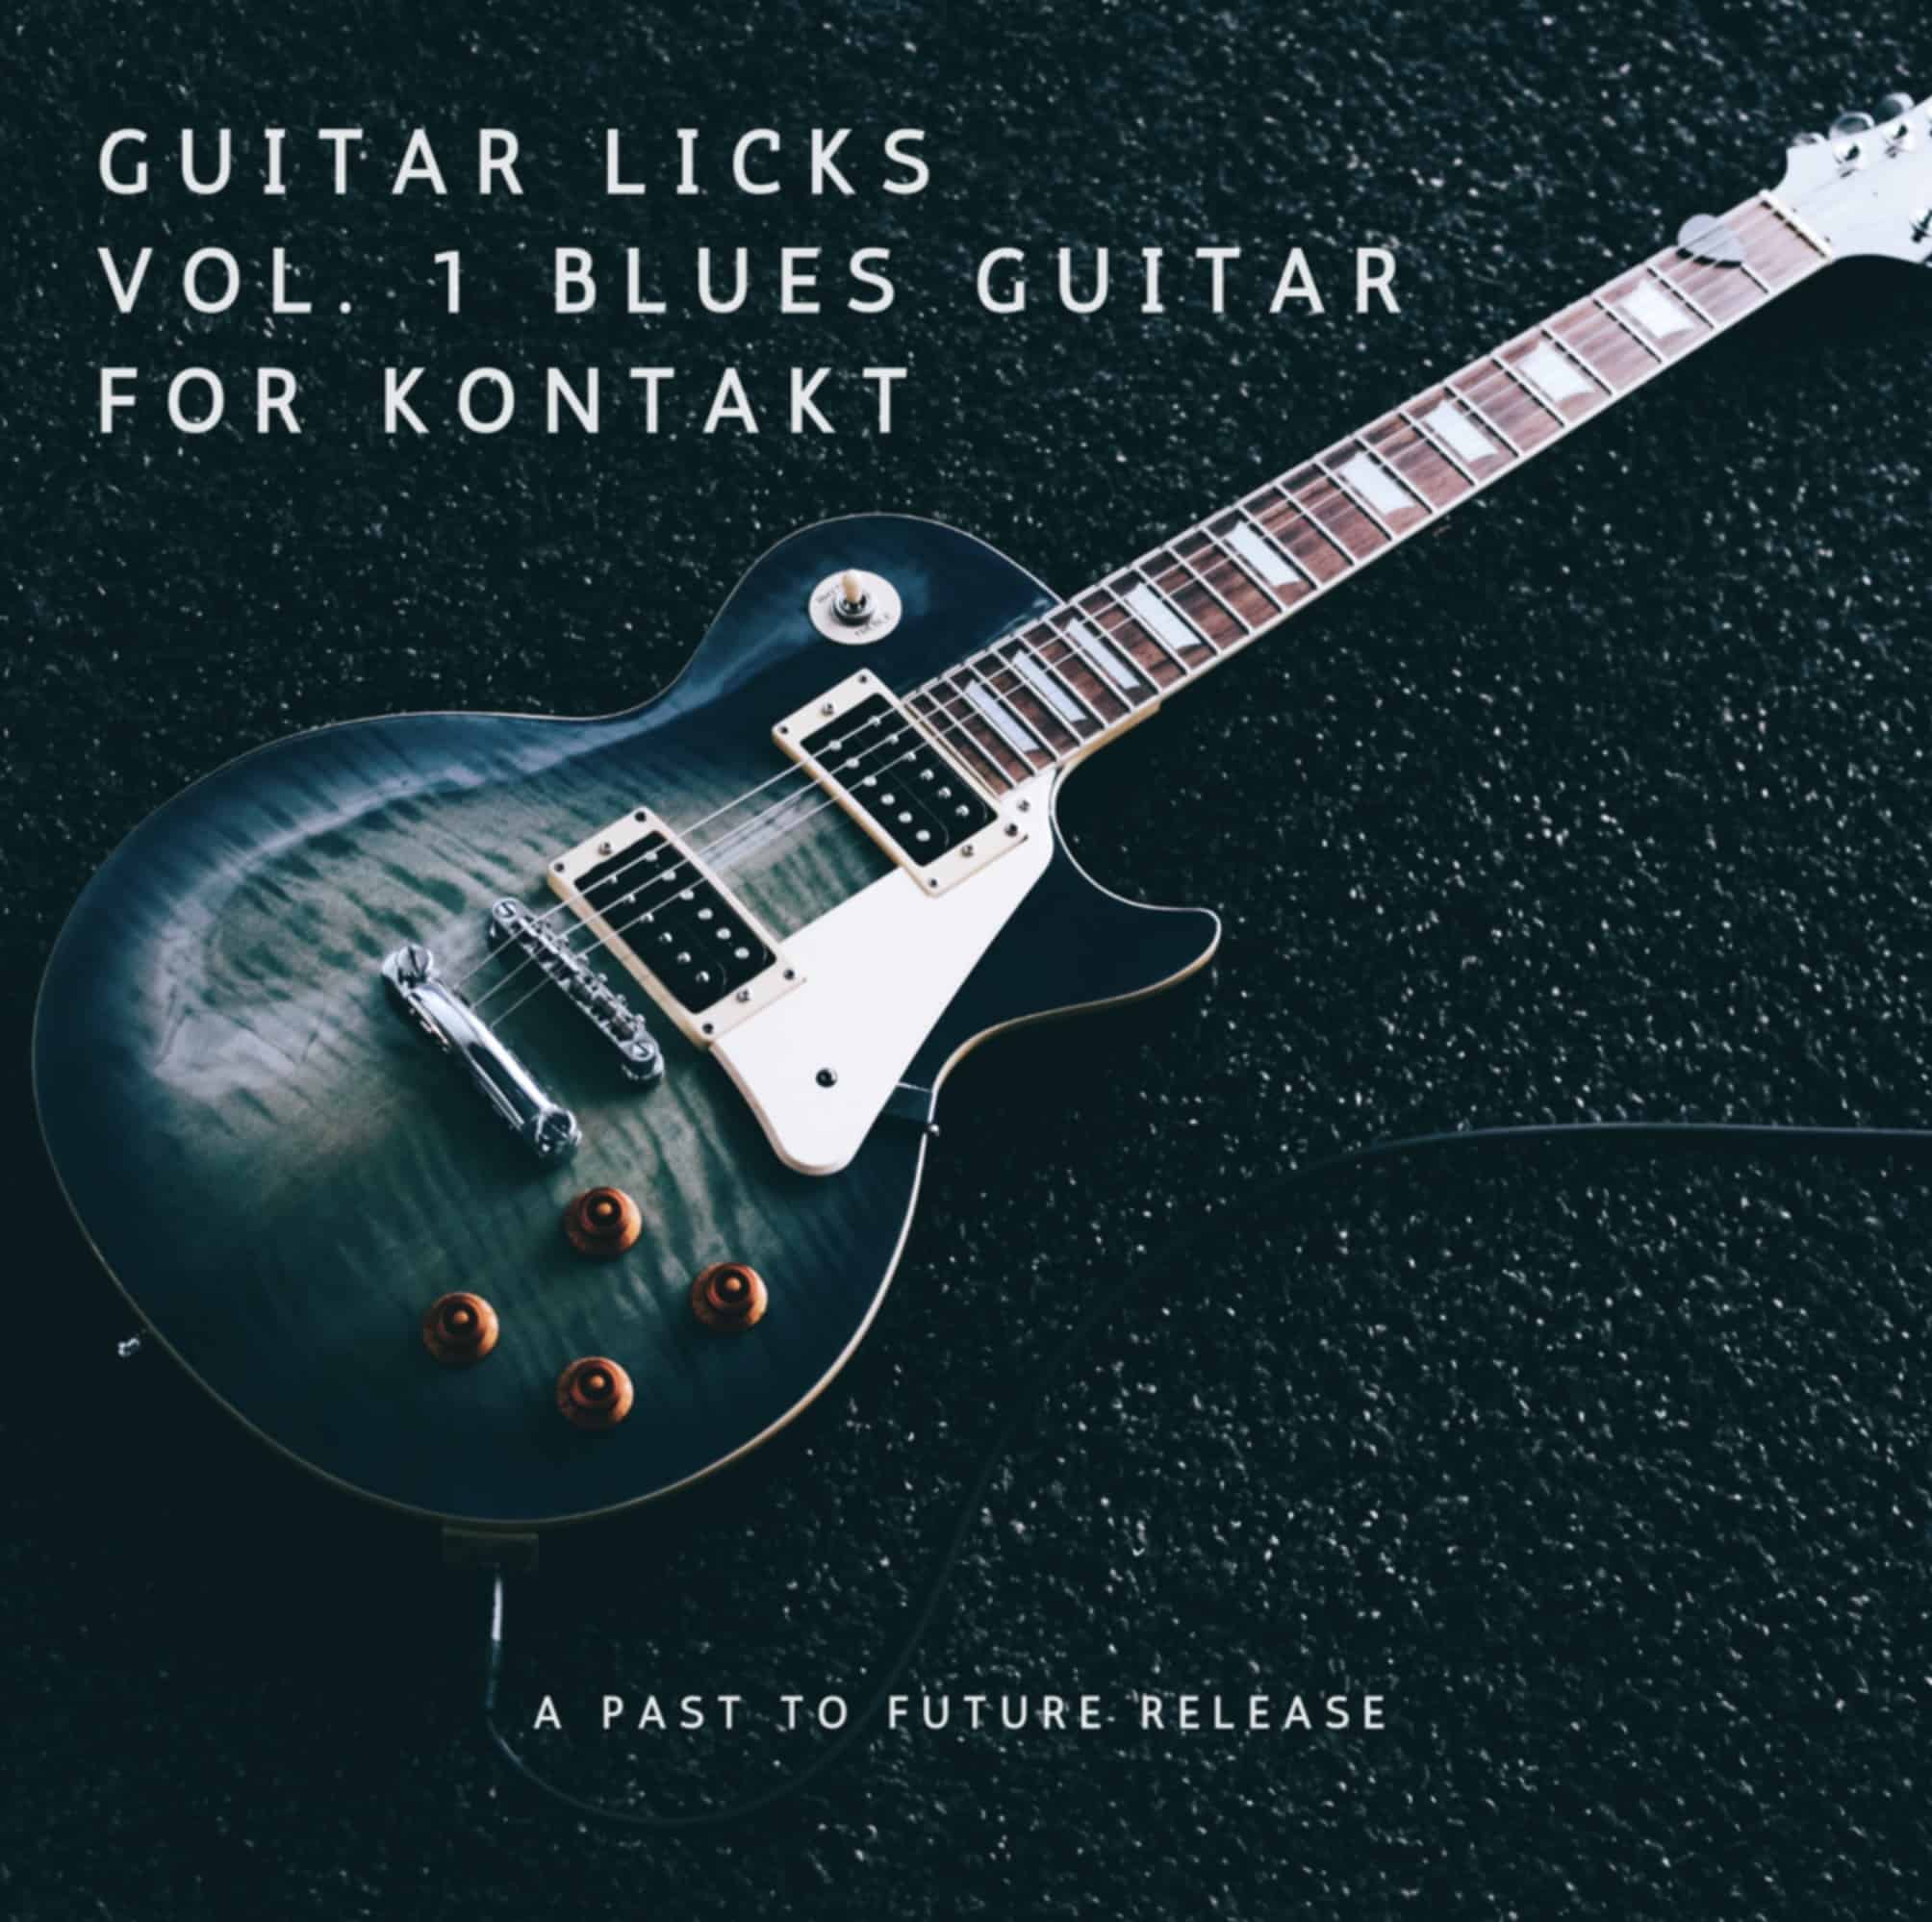 Past-To-Future-Reverbs-New-Guitar-Licks-Vol.-1-Blues-Guitar-For-Kontakt-1-Introductory-Price